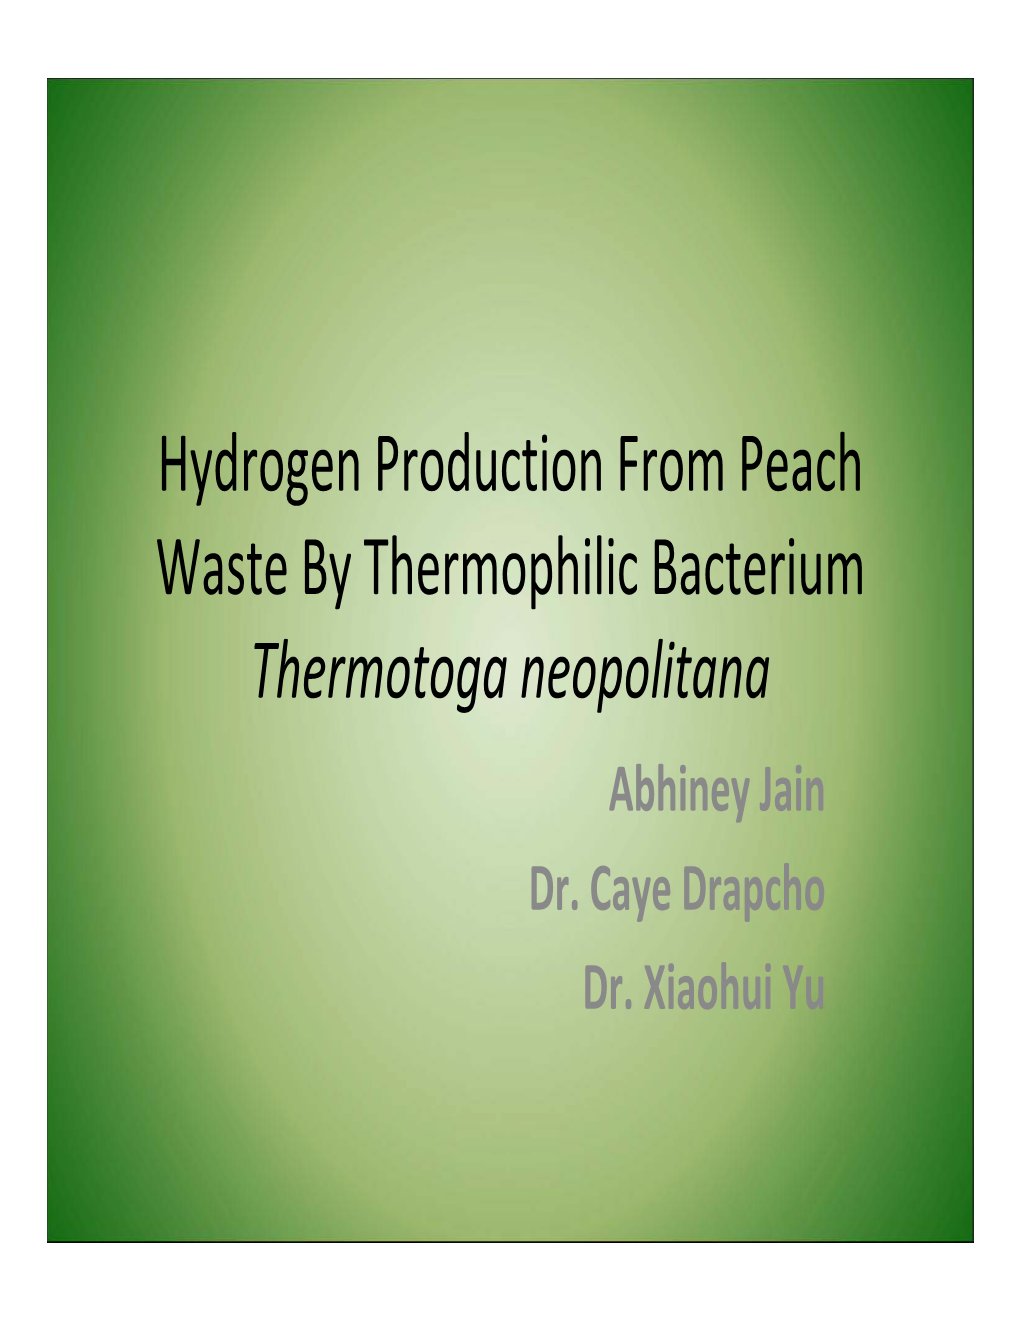 Hydrogen Production from Peach Waste by Thermophilic Bacterium Thermotoga Neopolitana Abhiney Jain Dr